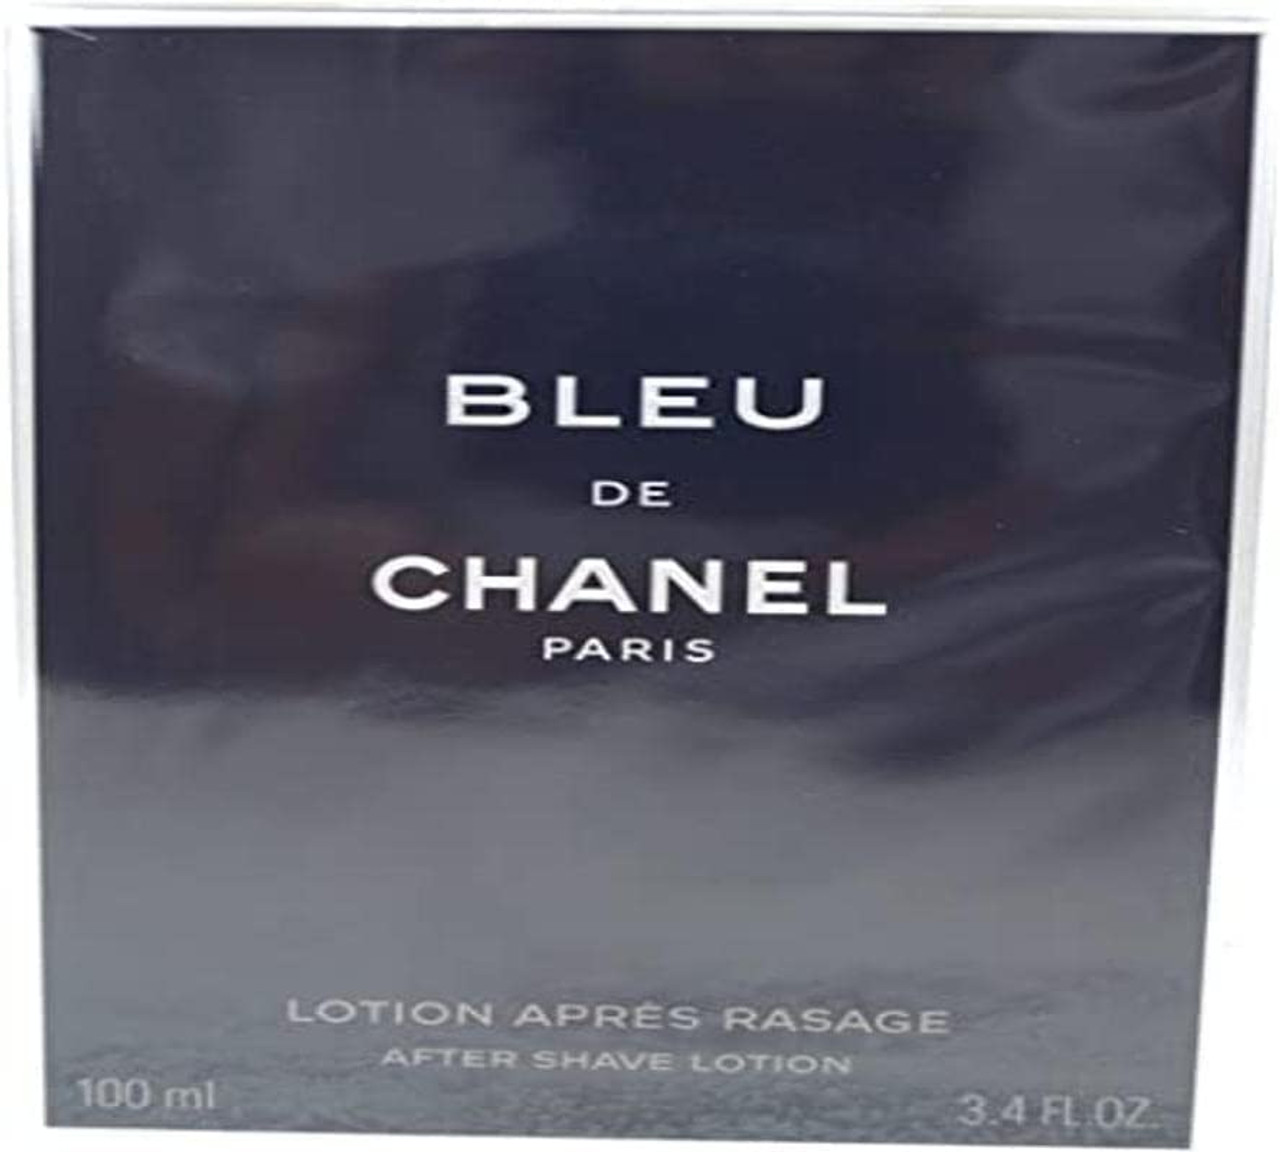 Bleu De Chanel After Shave Lotion by Chanel